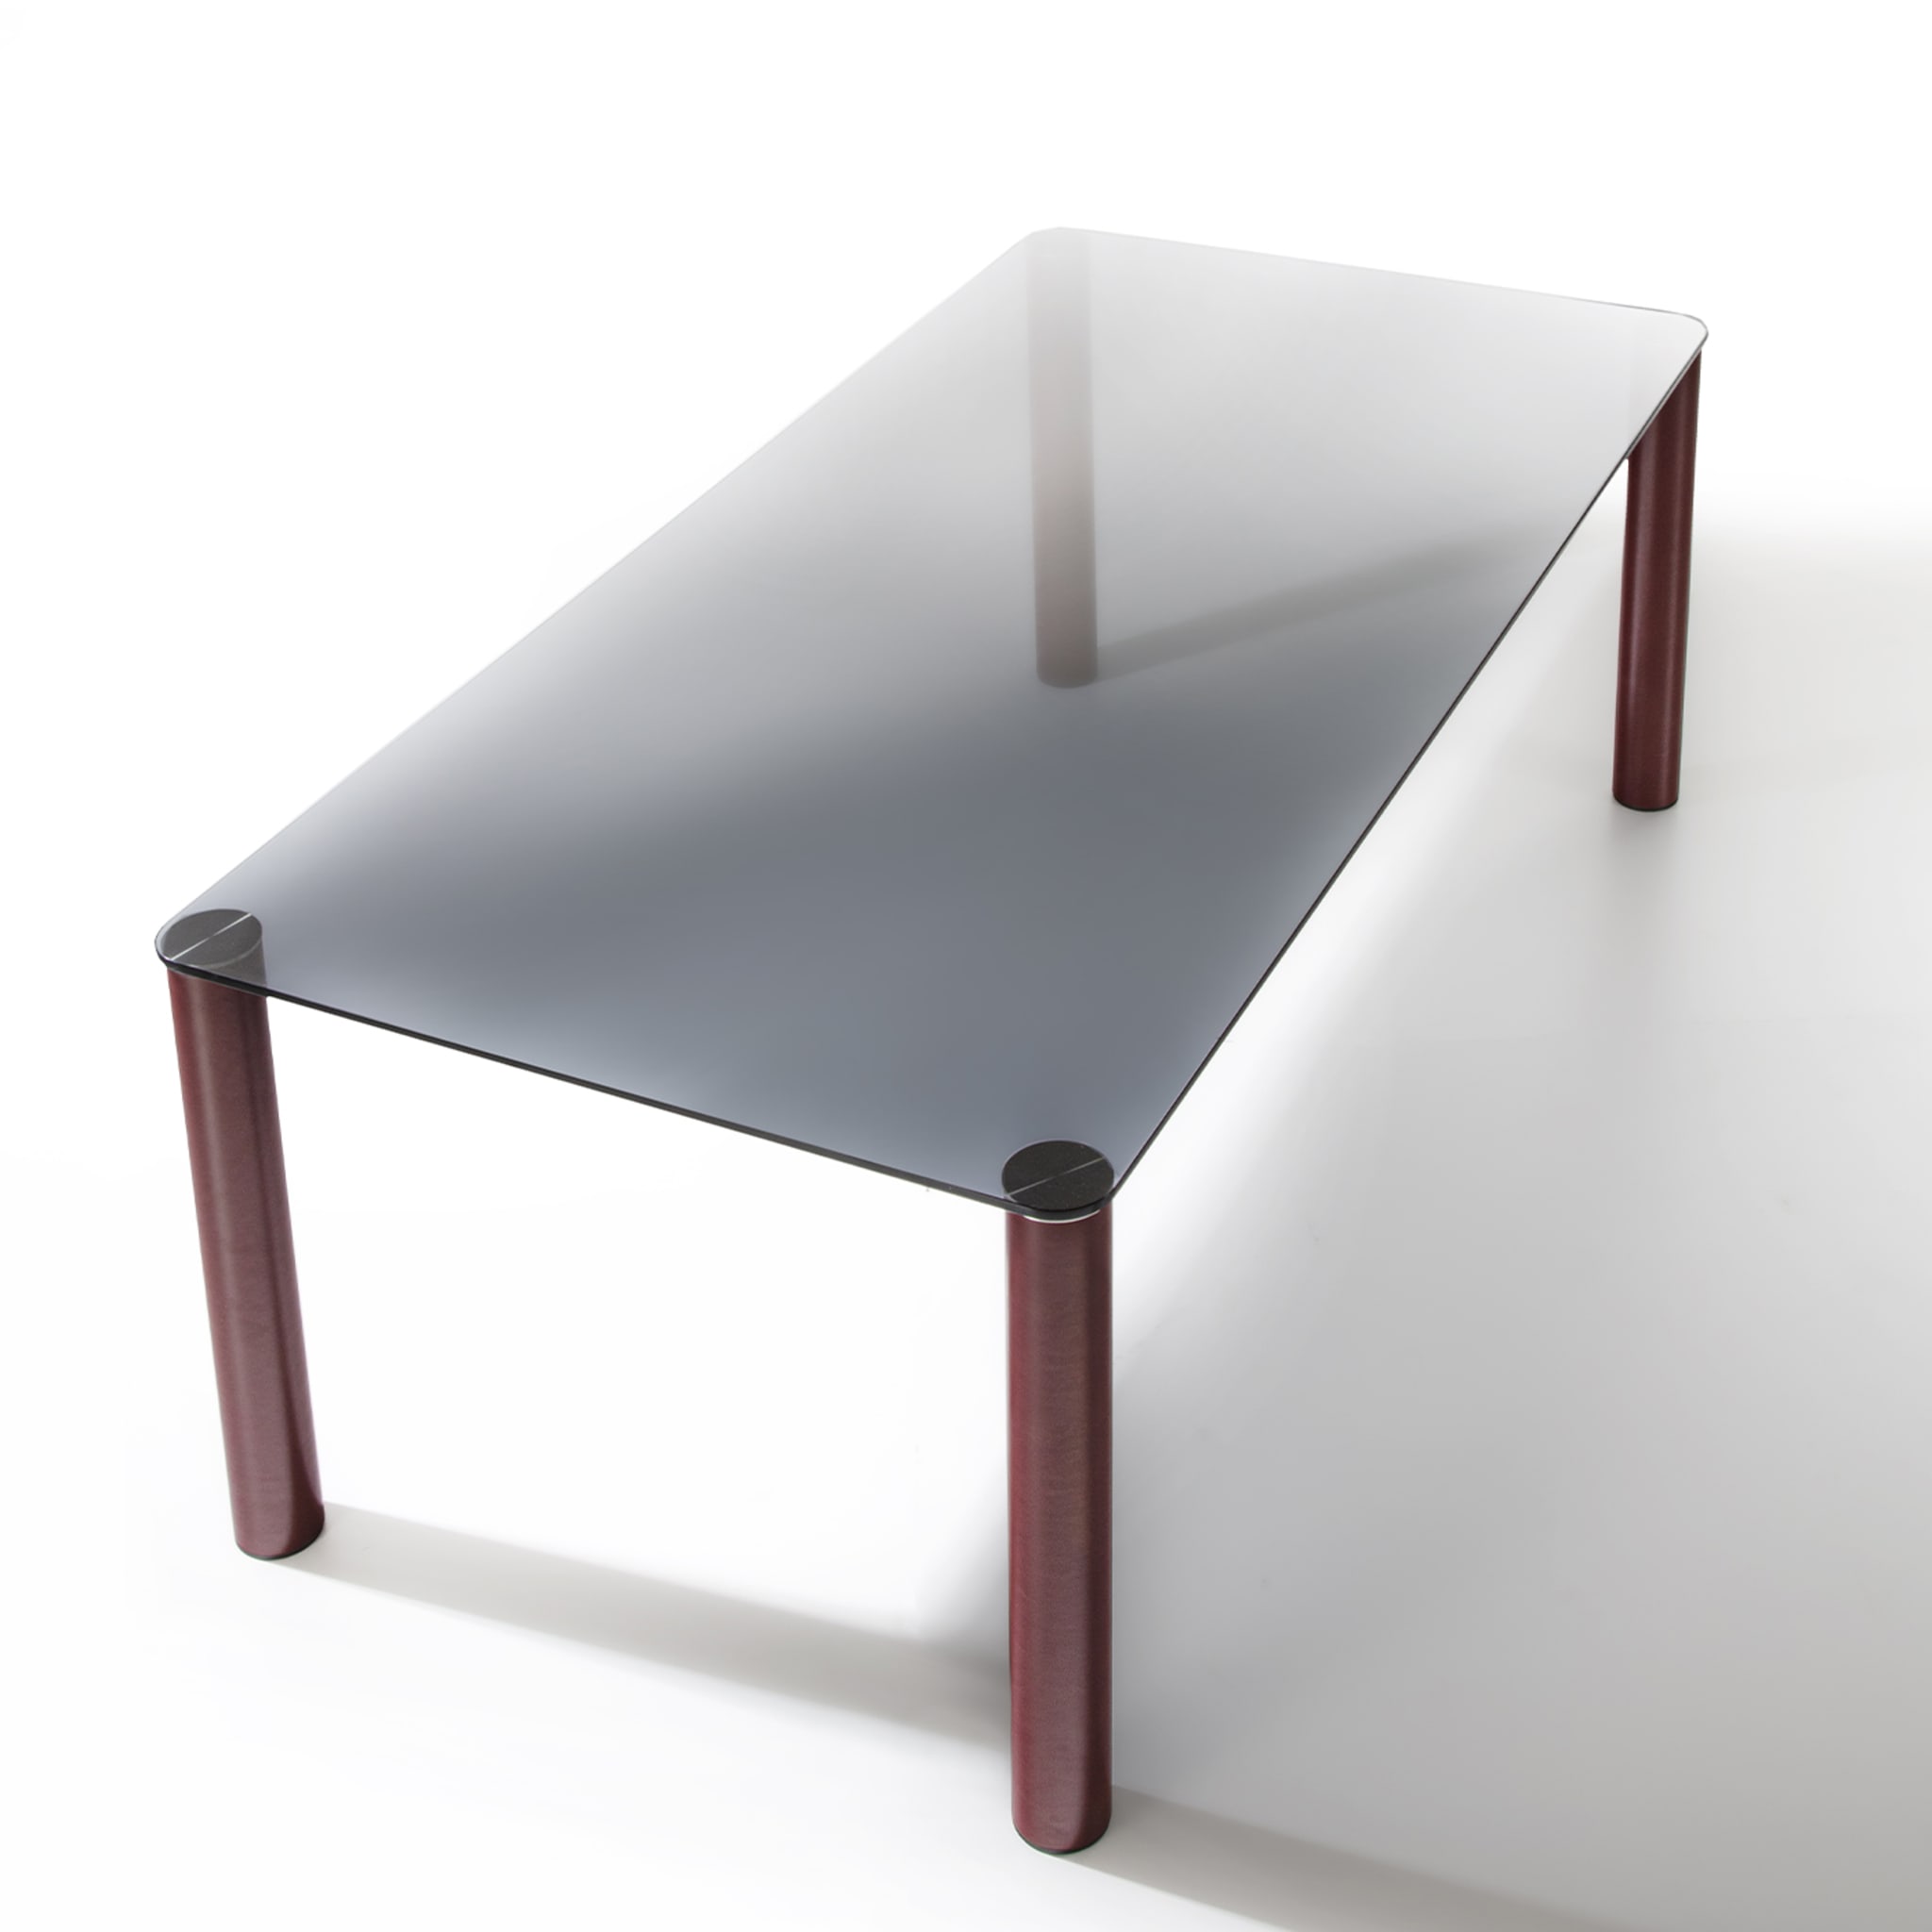 Fagus Smoked Burgundy Dining Table - Alternative view 1